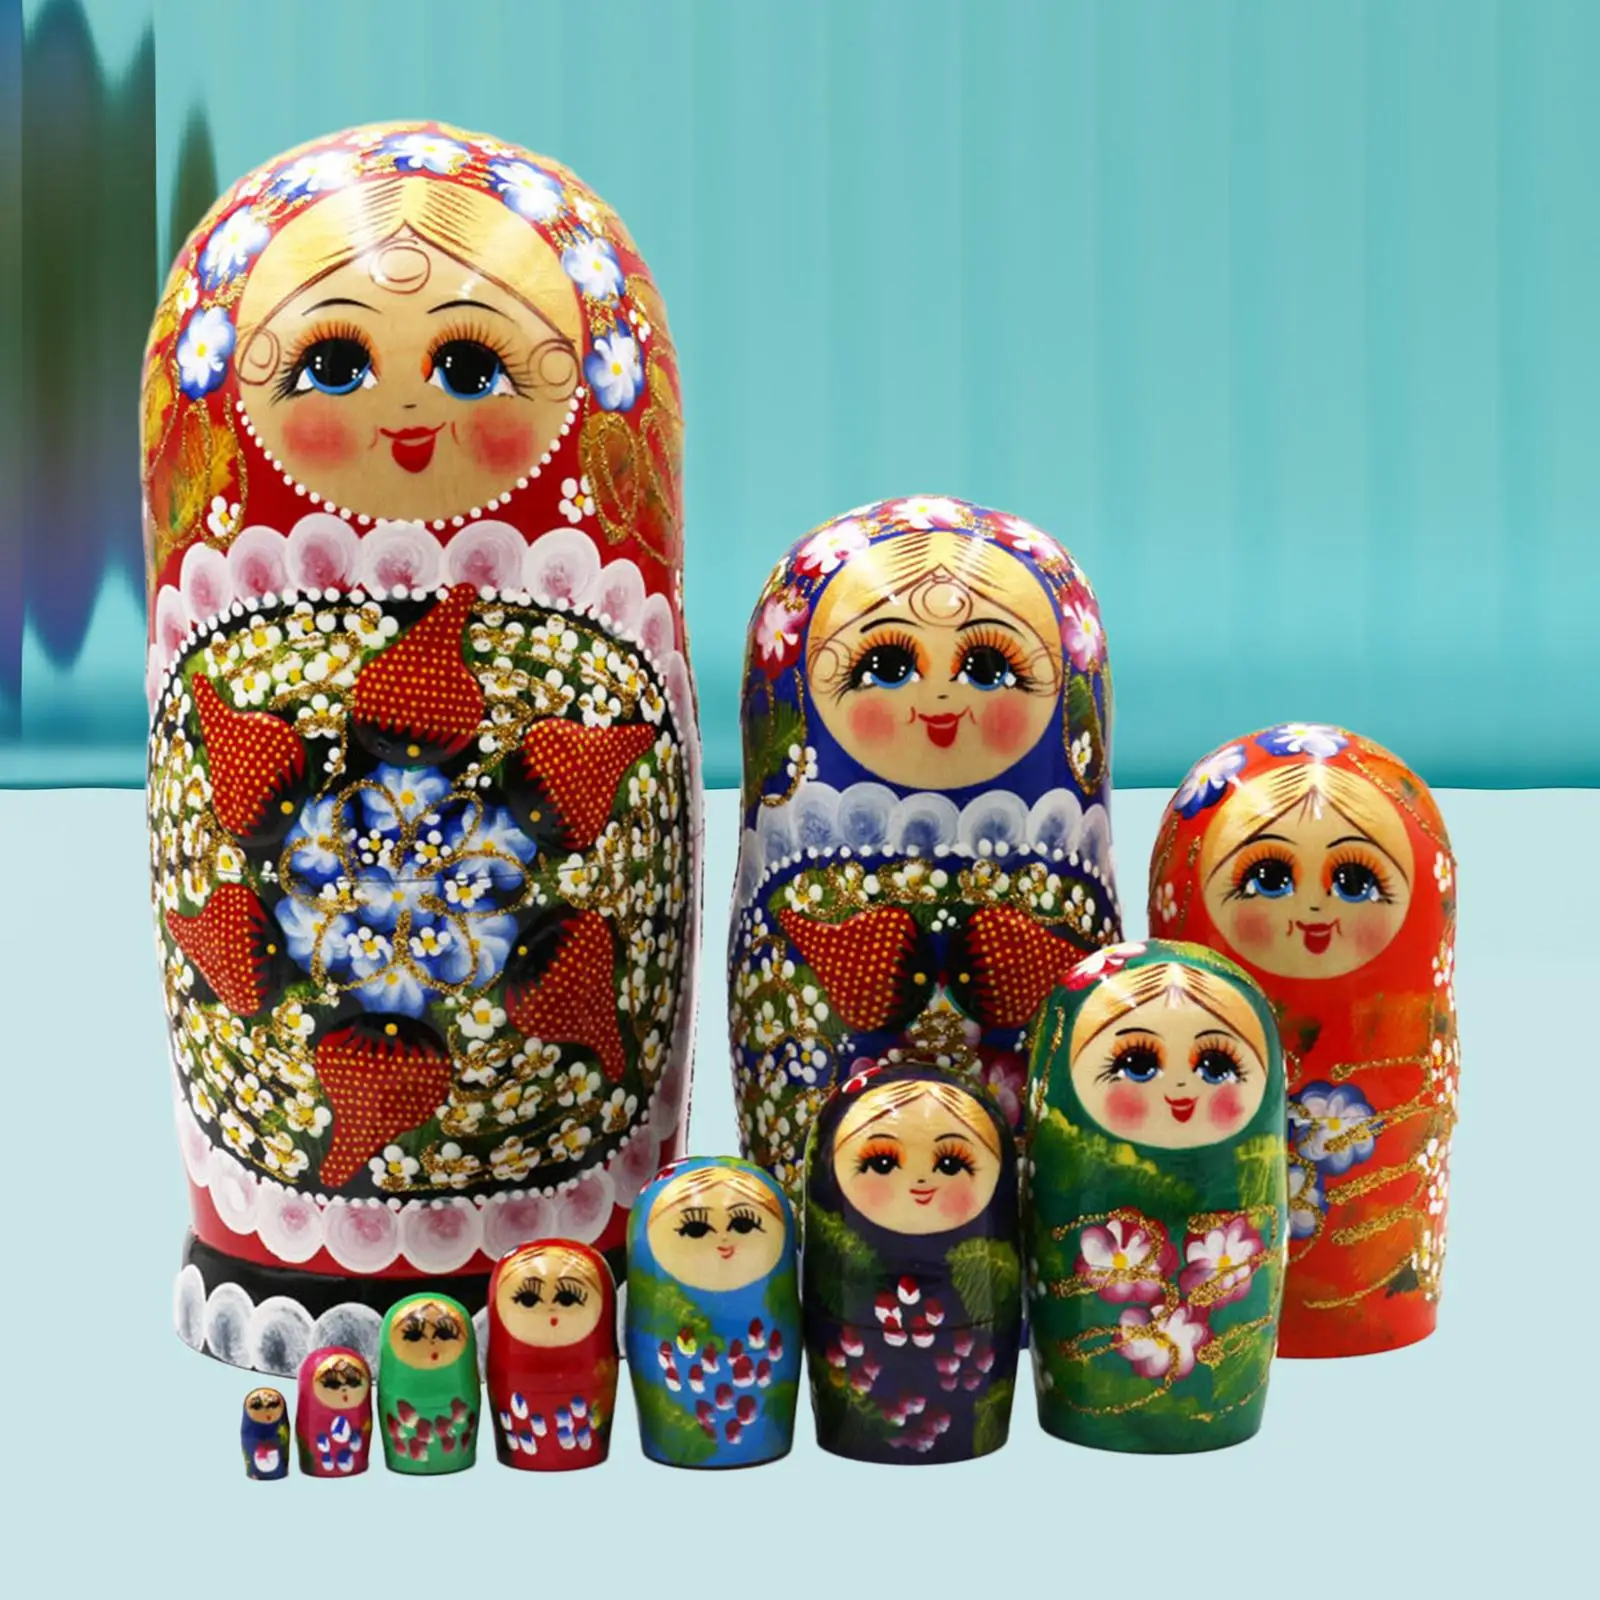 10 Pieces Stacking Doll Set Desk Handmade Russian Nesting Dolls Ornaments